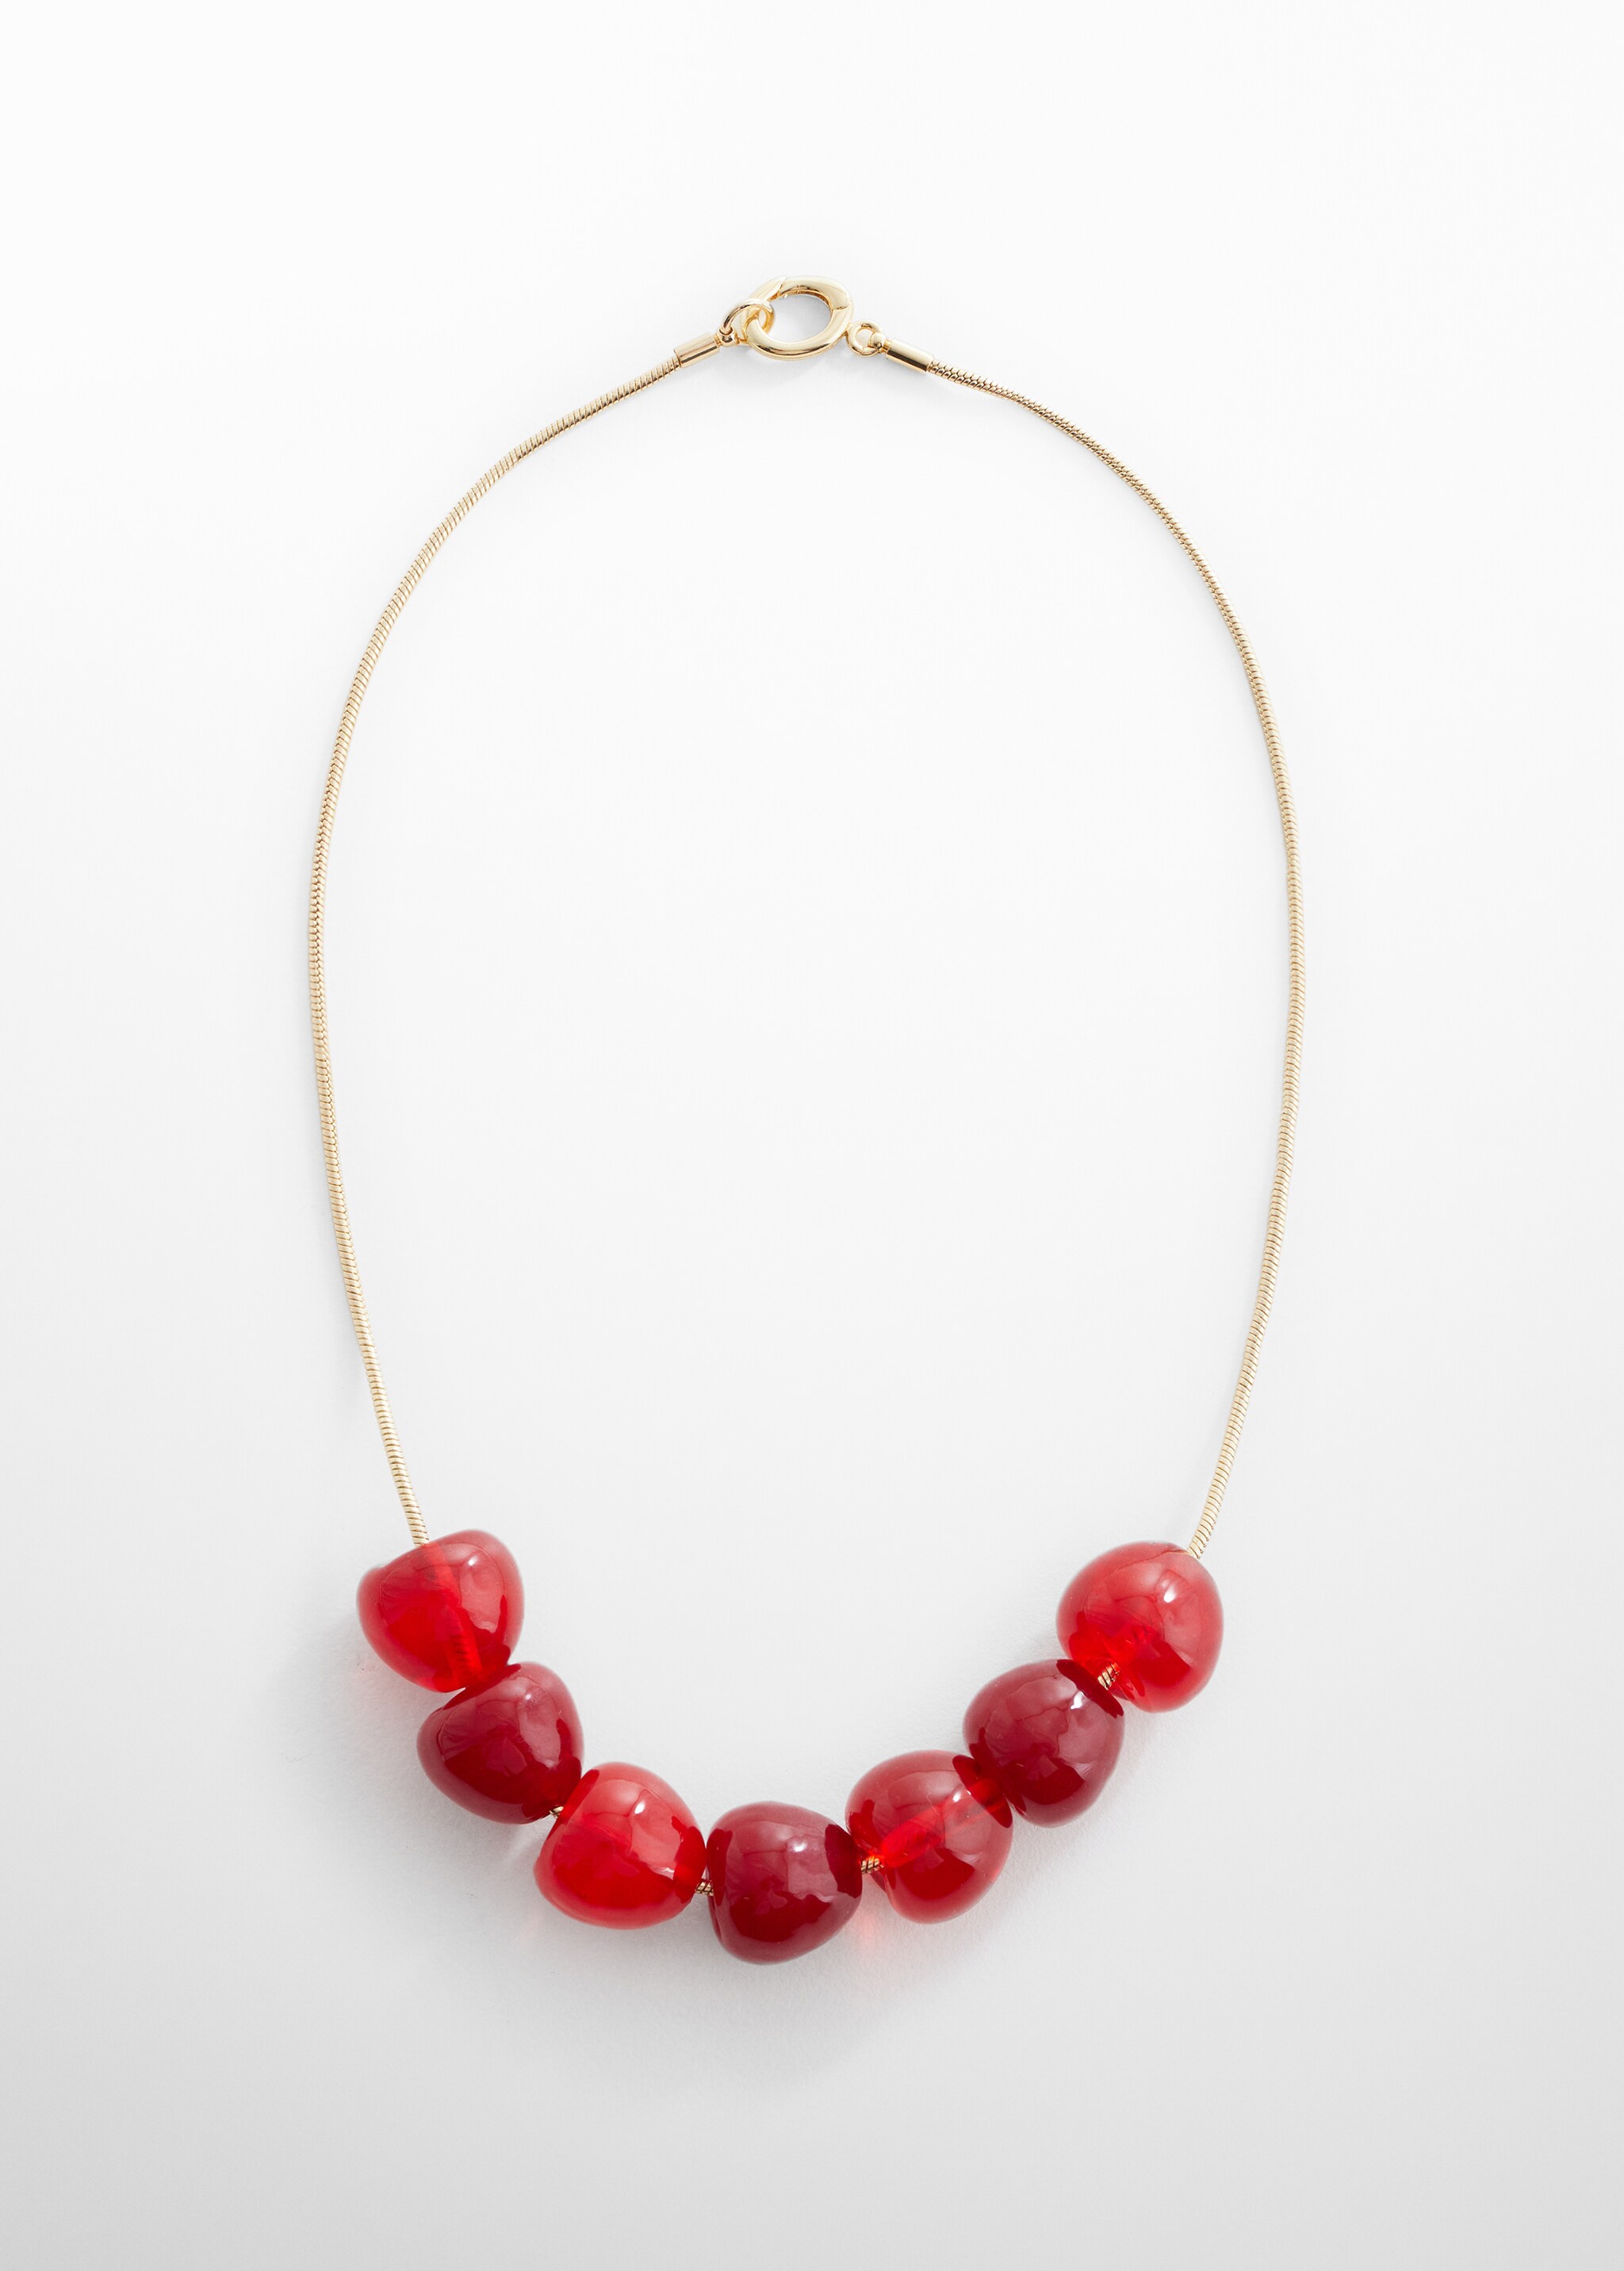 Cherry pendant necklace - Article without model